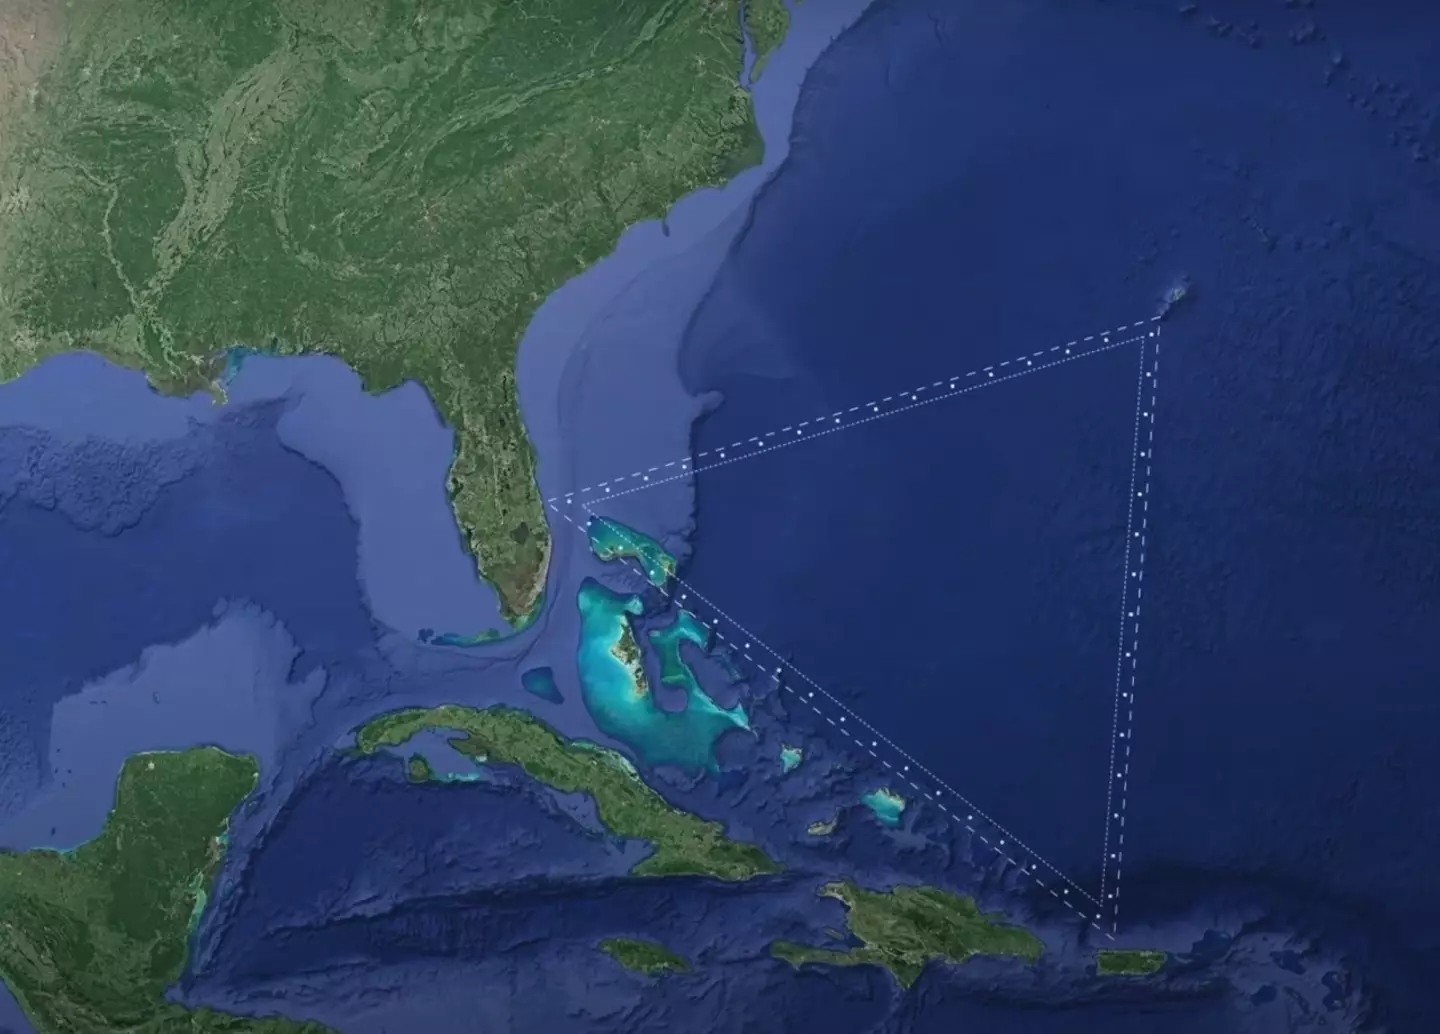 The decades-long mystery behind the Bermuda Triangle disappearances have finally been 'solved', an expert has claimed.